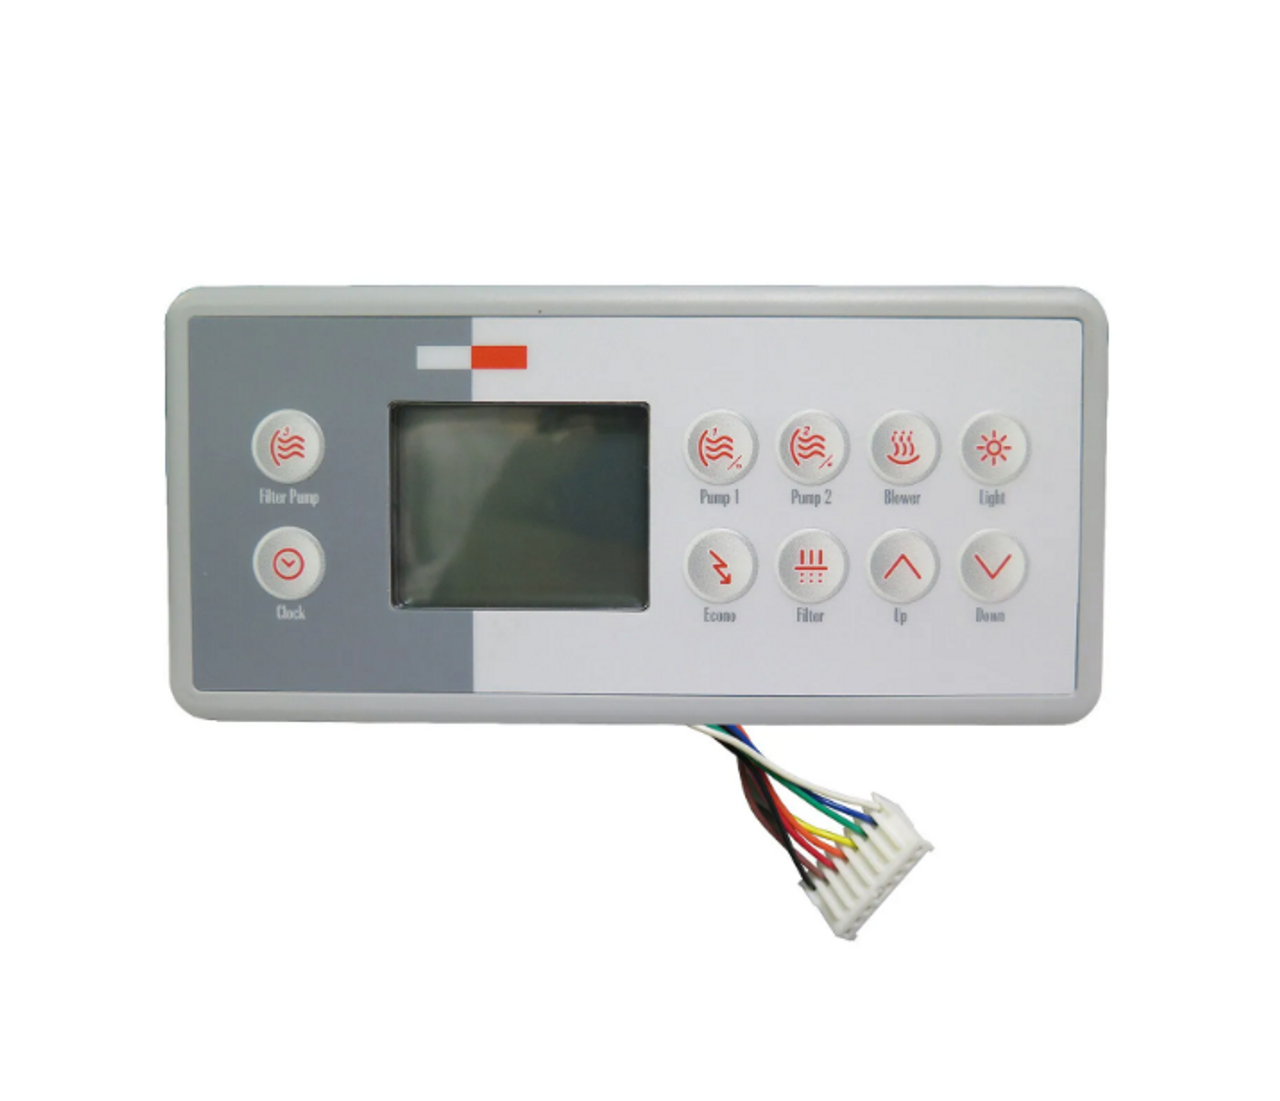 Gecko K-4 Control Panel 0201-007044 with 10 Button Overlay